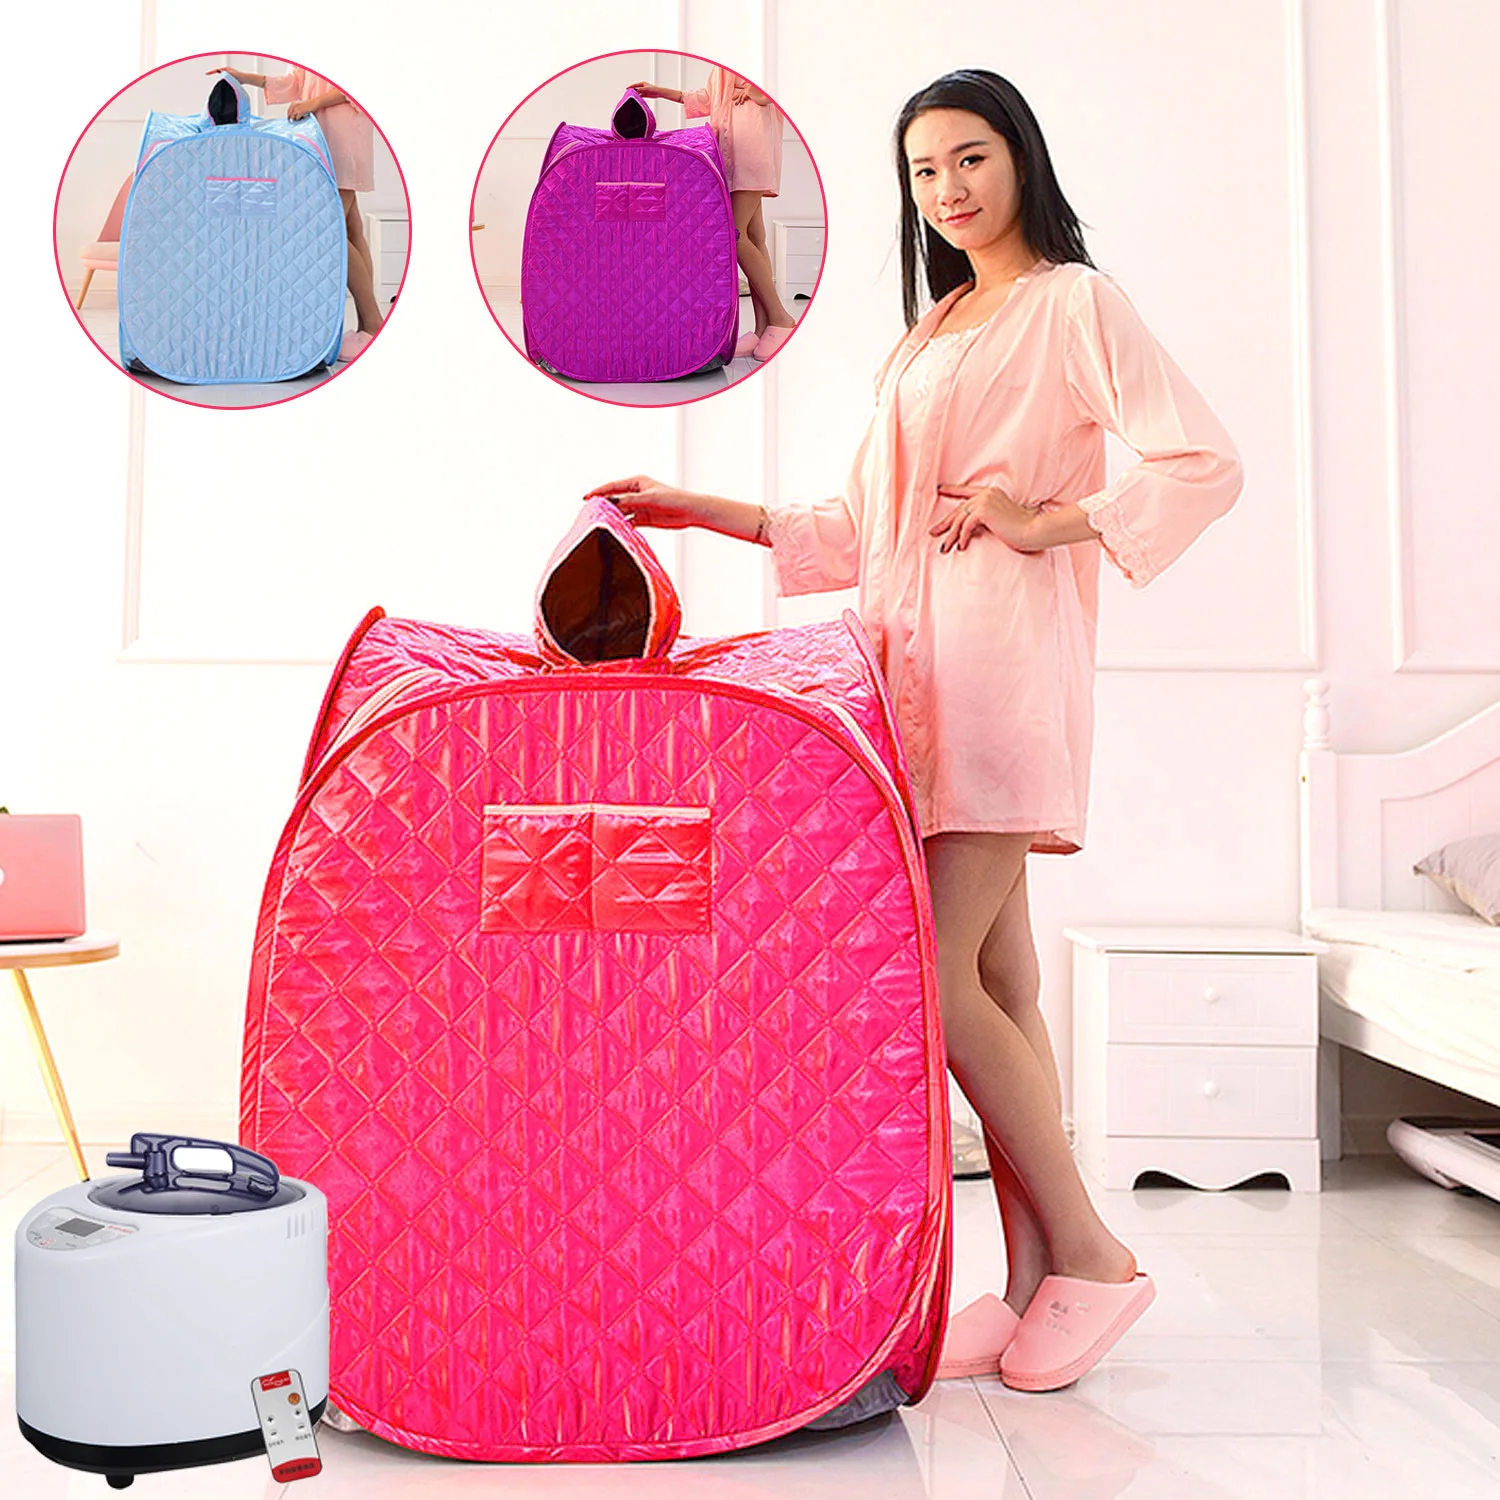 

Portable Folding Steam Sauna SPA Room Tent Without Steamer for One Person or Two People Weight Loss Full Body Slimming Free Ship